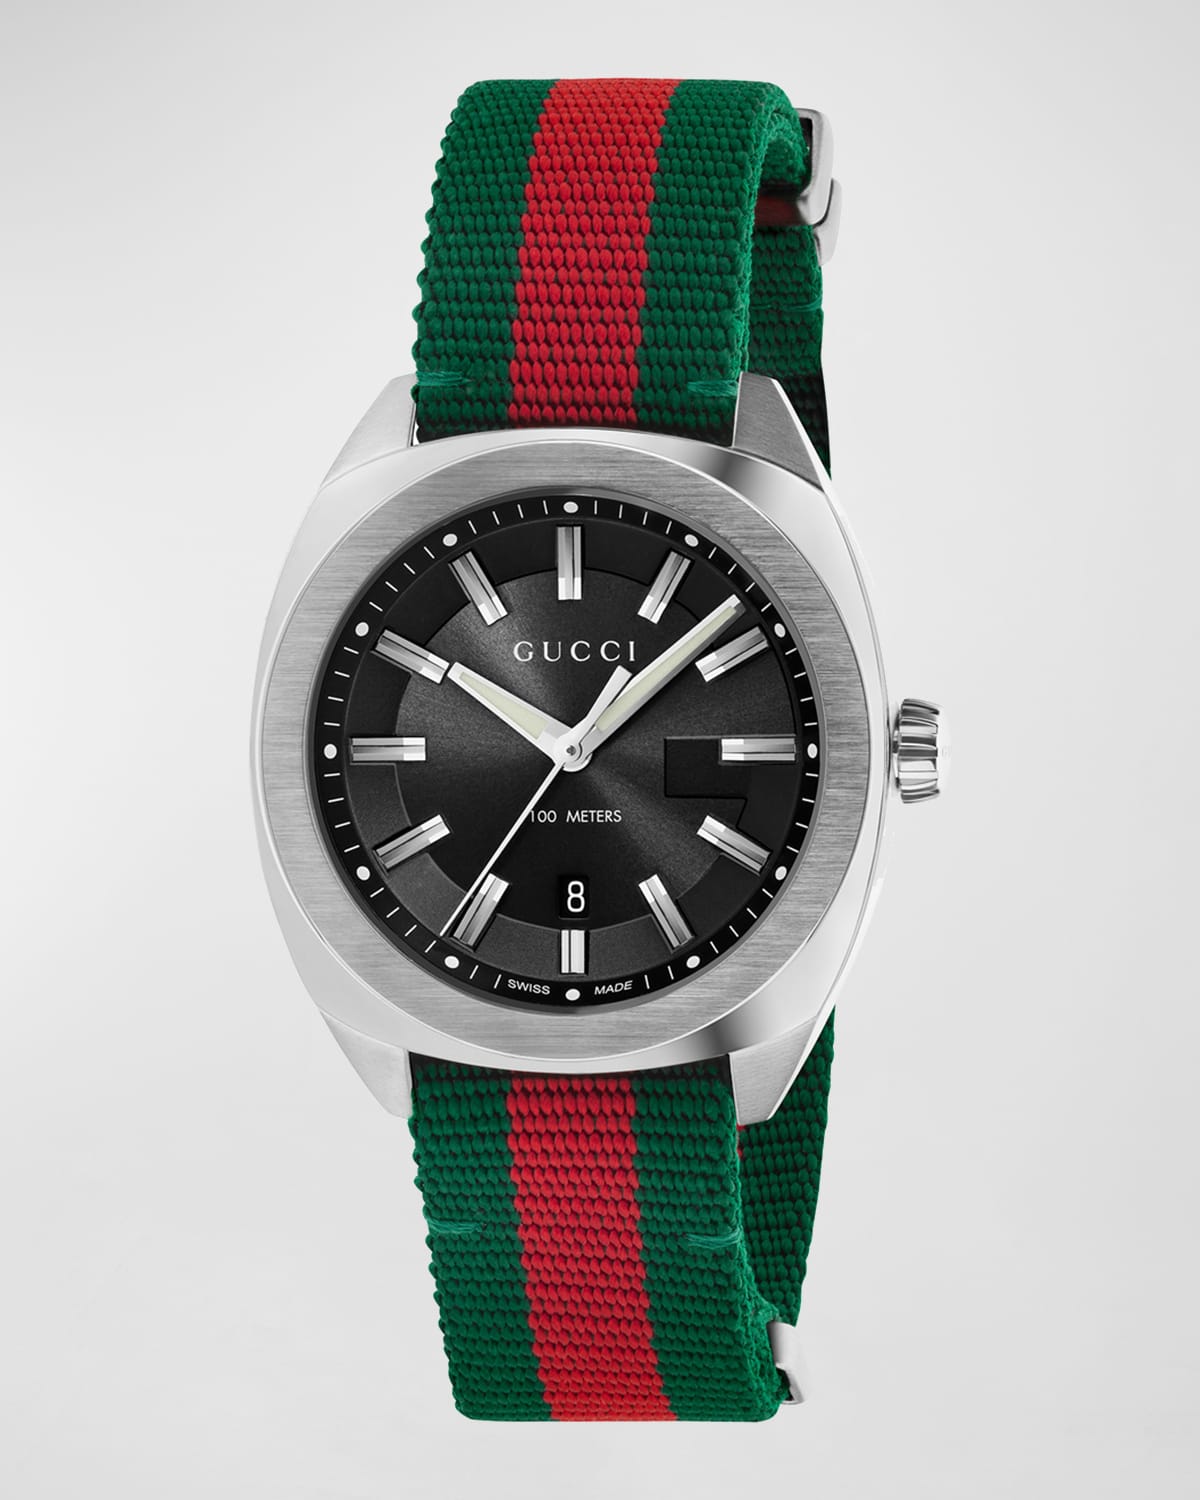 Gucci Men's Watch with Signature Web Strap